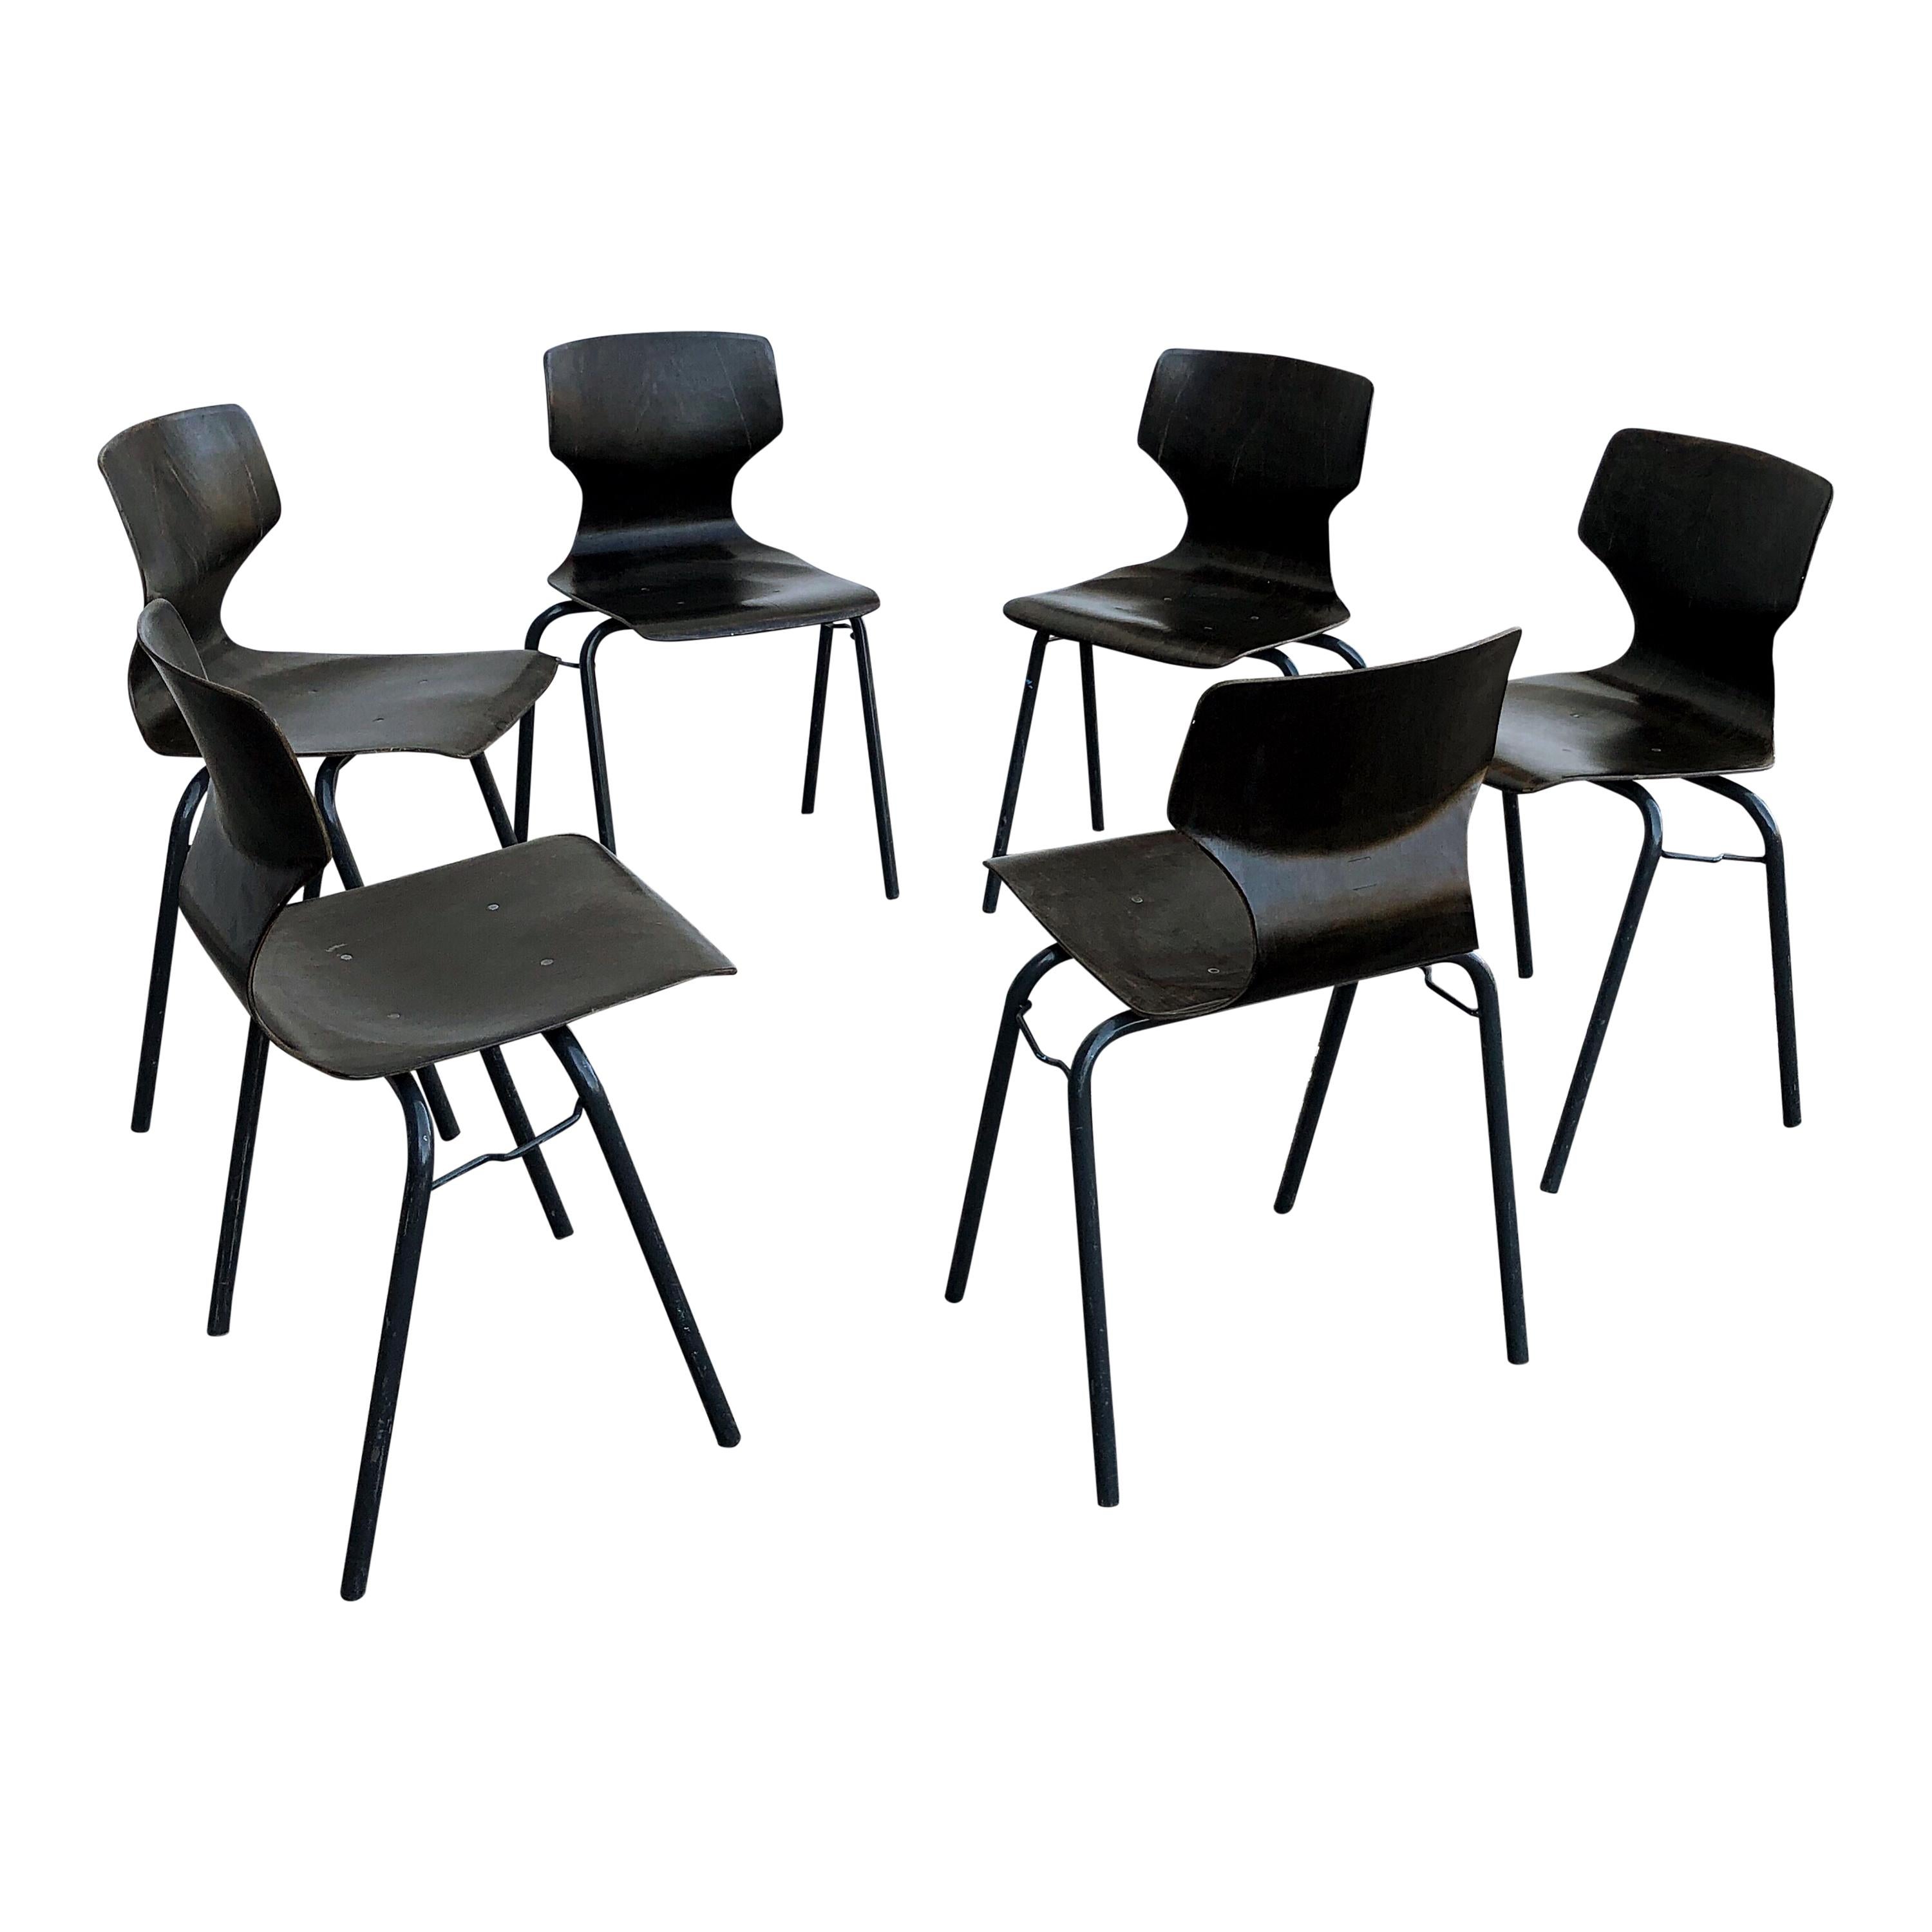 Beautiful Industrial stackable strength molded chairs designed by Adam Stegner. 
Made from strong Pagwood shaped seats (Pagwood is high density laminated compressed wood, with orthopedic pelvic and back support without adjustment), set on strong